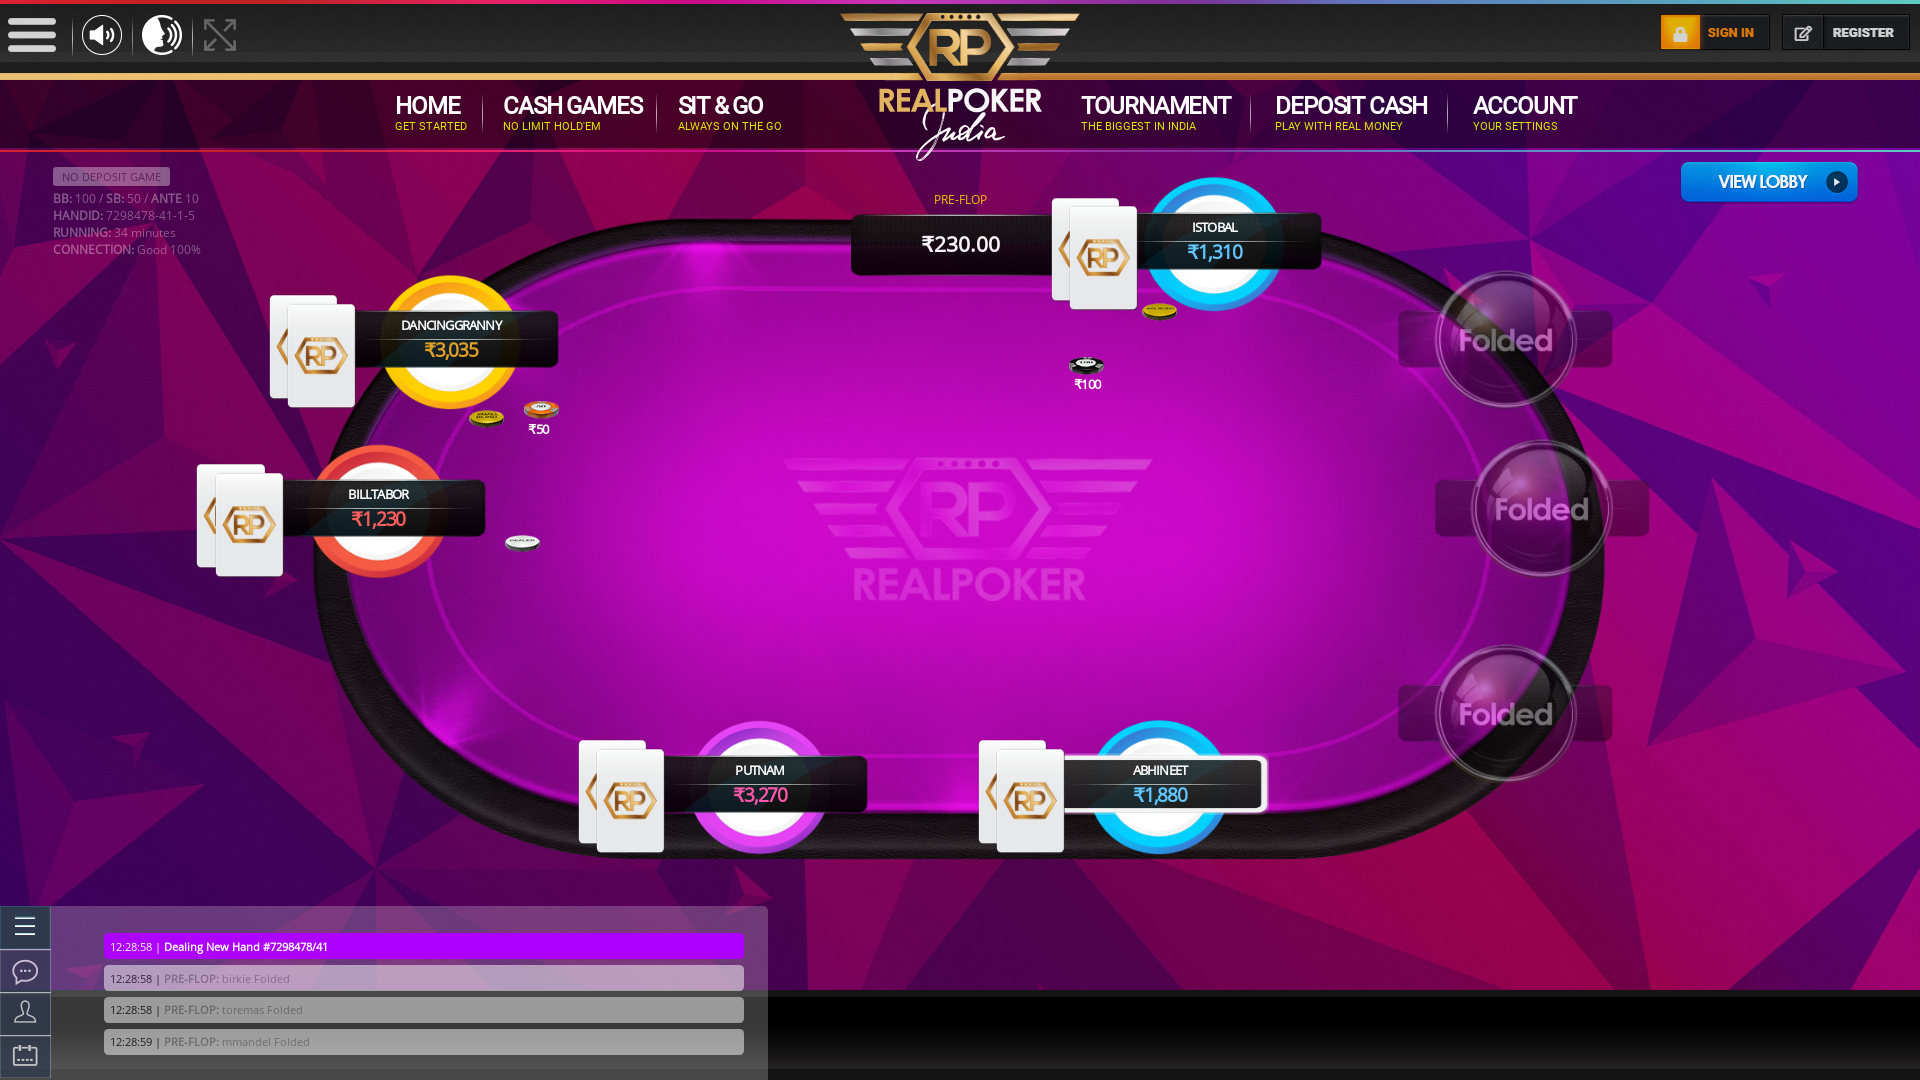 HSR Layout, Bangalore poker table on a 10 player table in the 34th minute